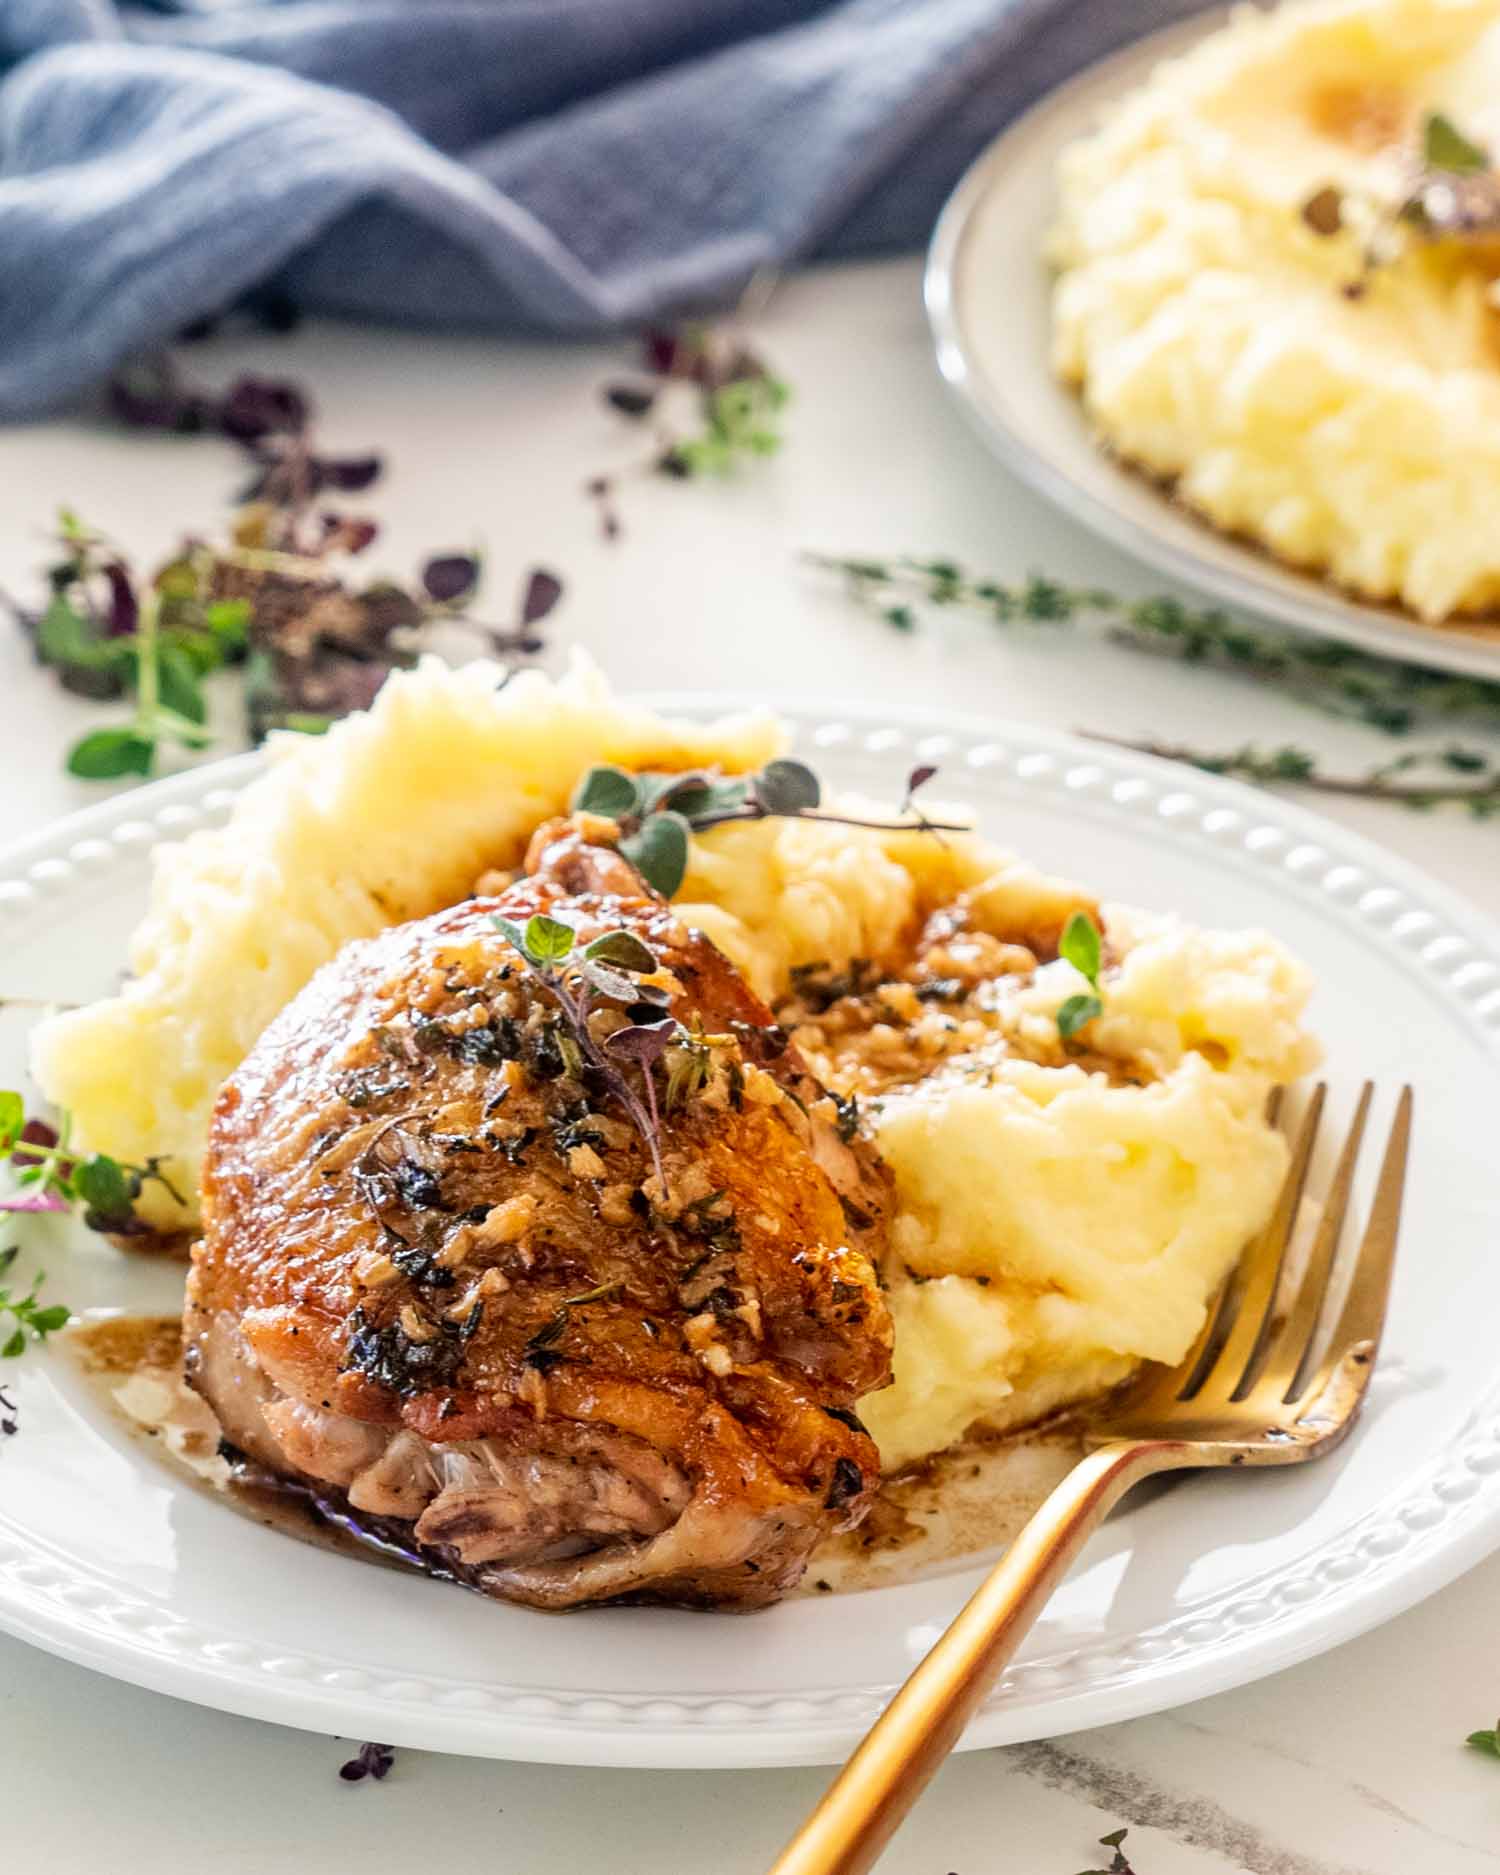 a chicken thigh in garlic and herb sauce over a bed of mashed potatoes.